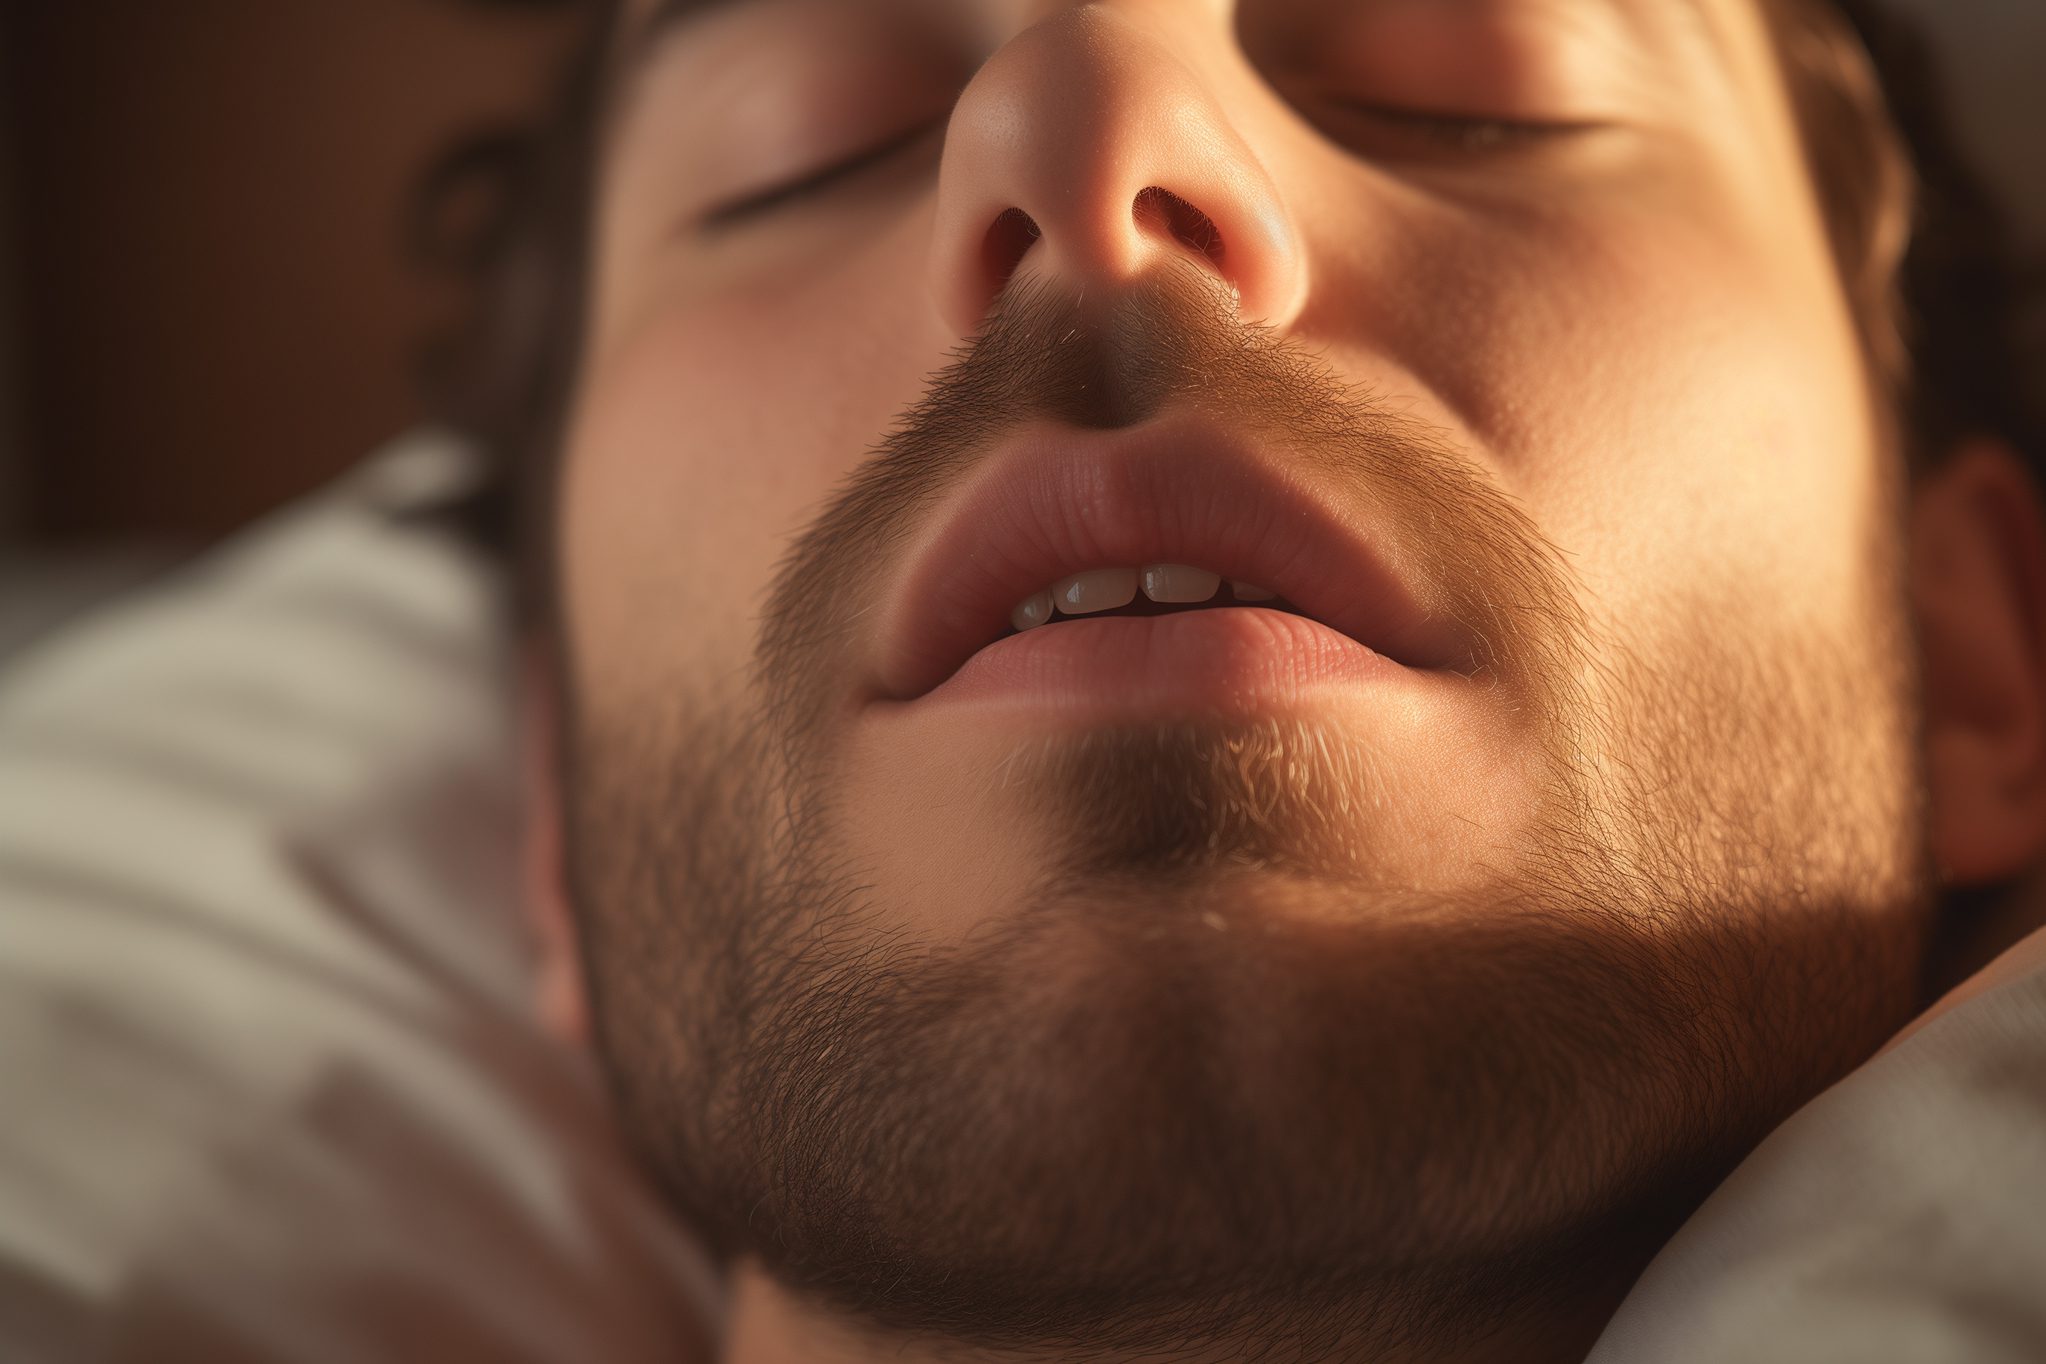 How Snoring Works and How it Affects Sleep Quality and Overall Health